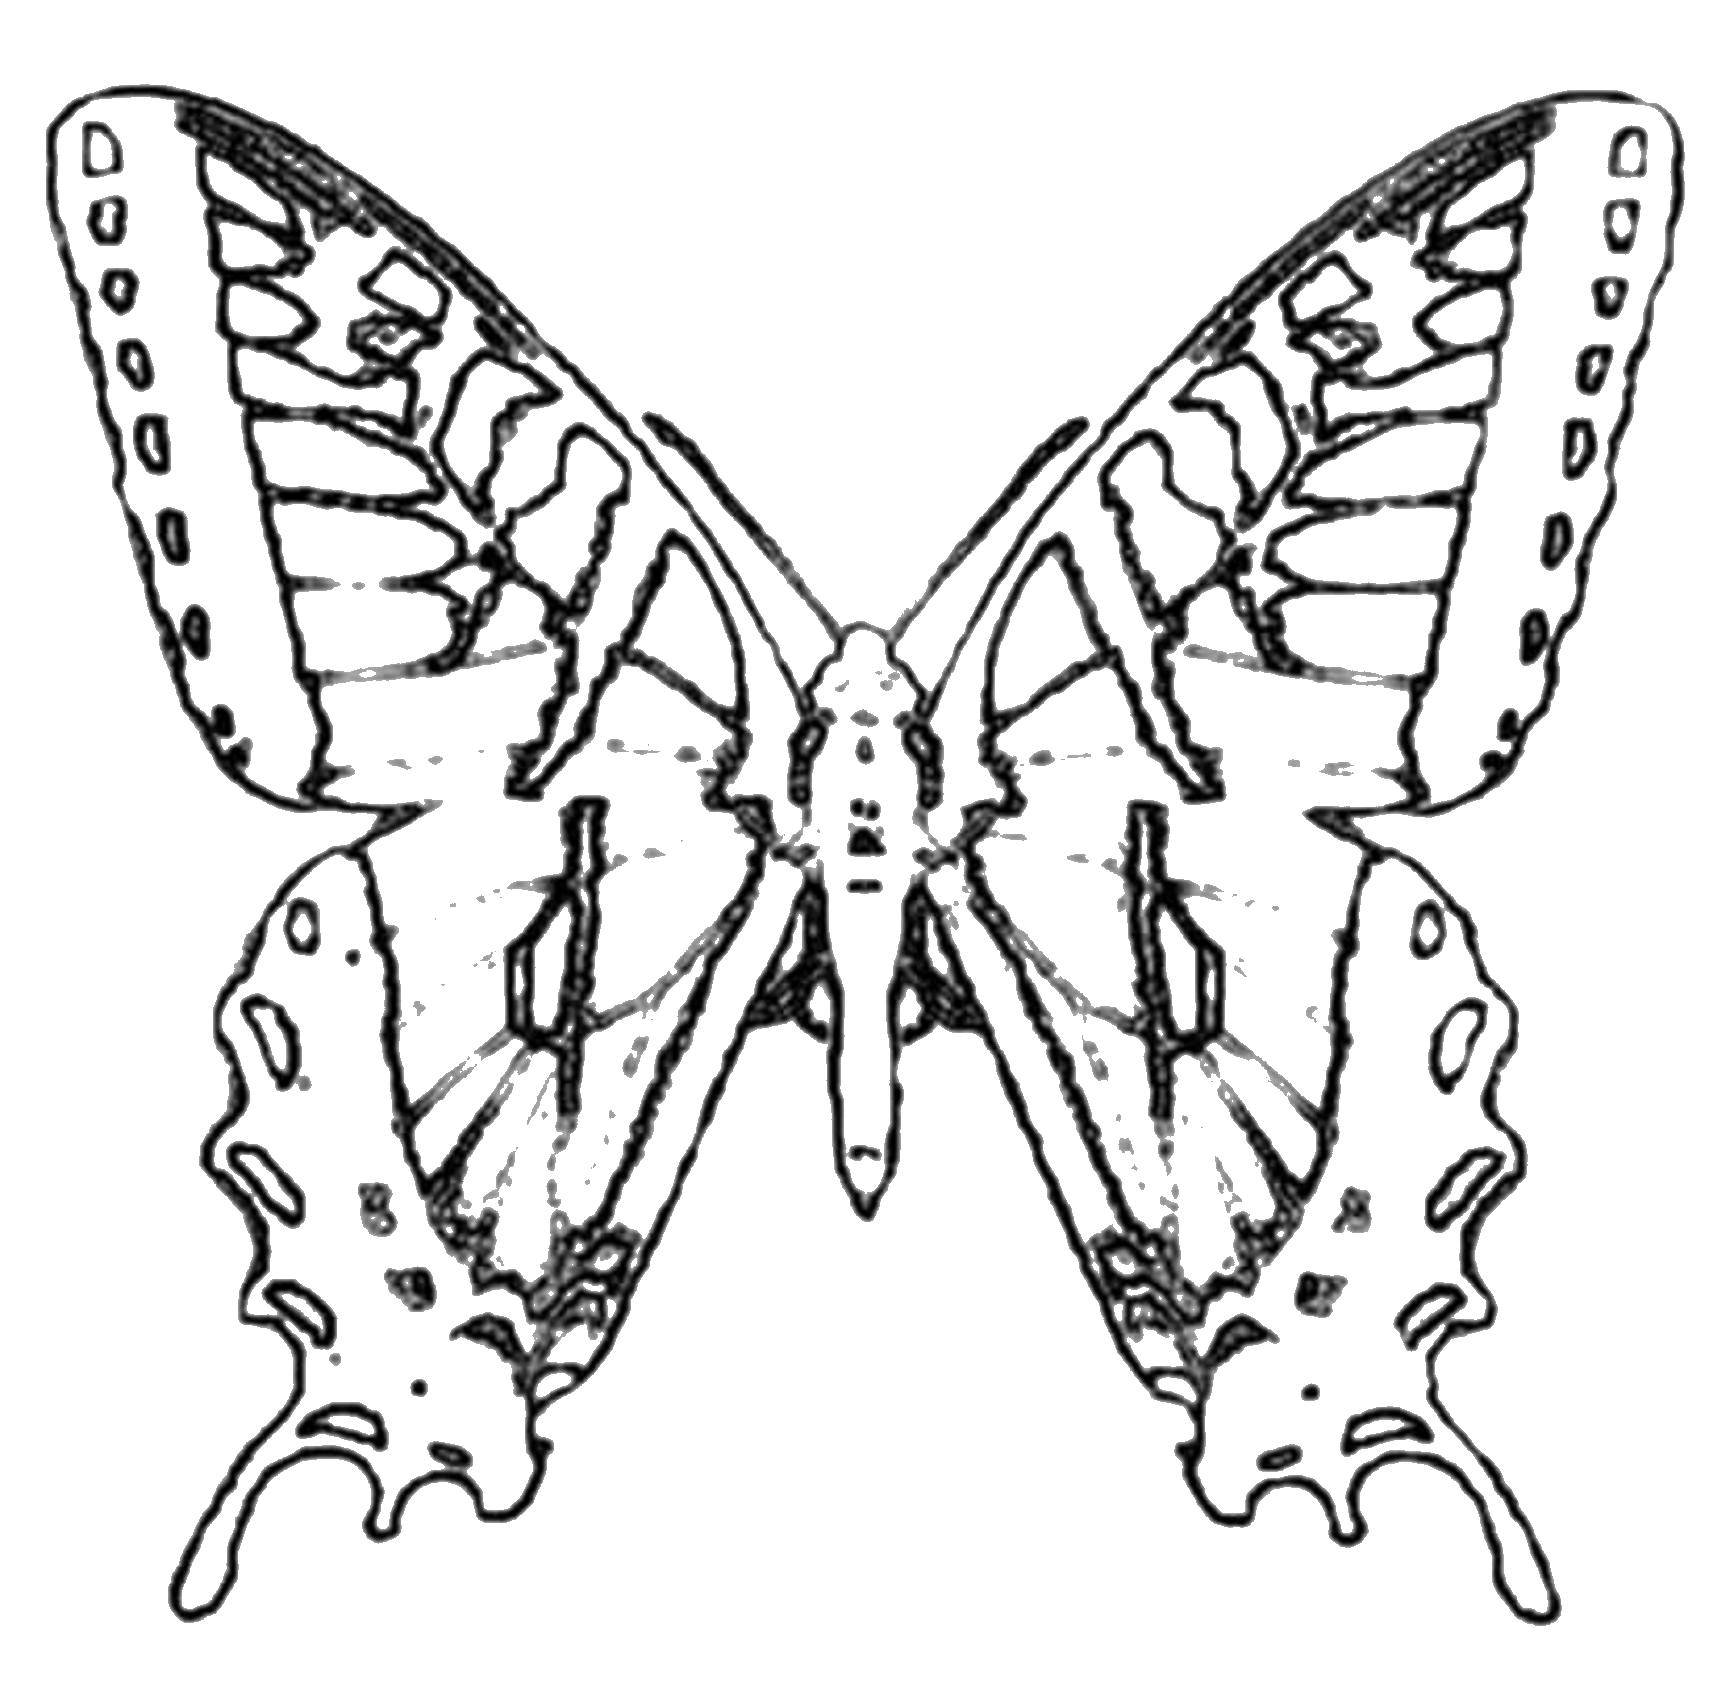 Coloring Butterfly. Category Insects. Tags:  insects, butterfly, wings.